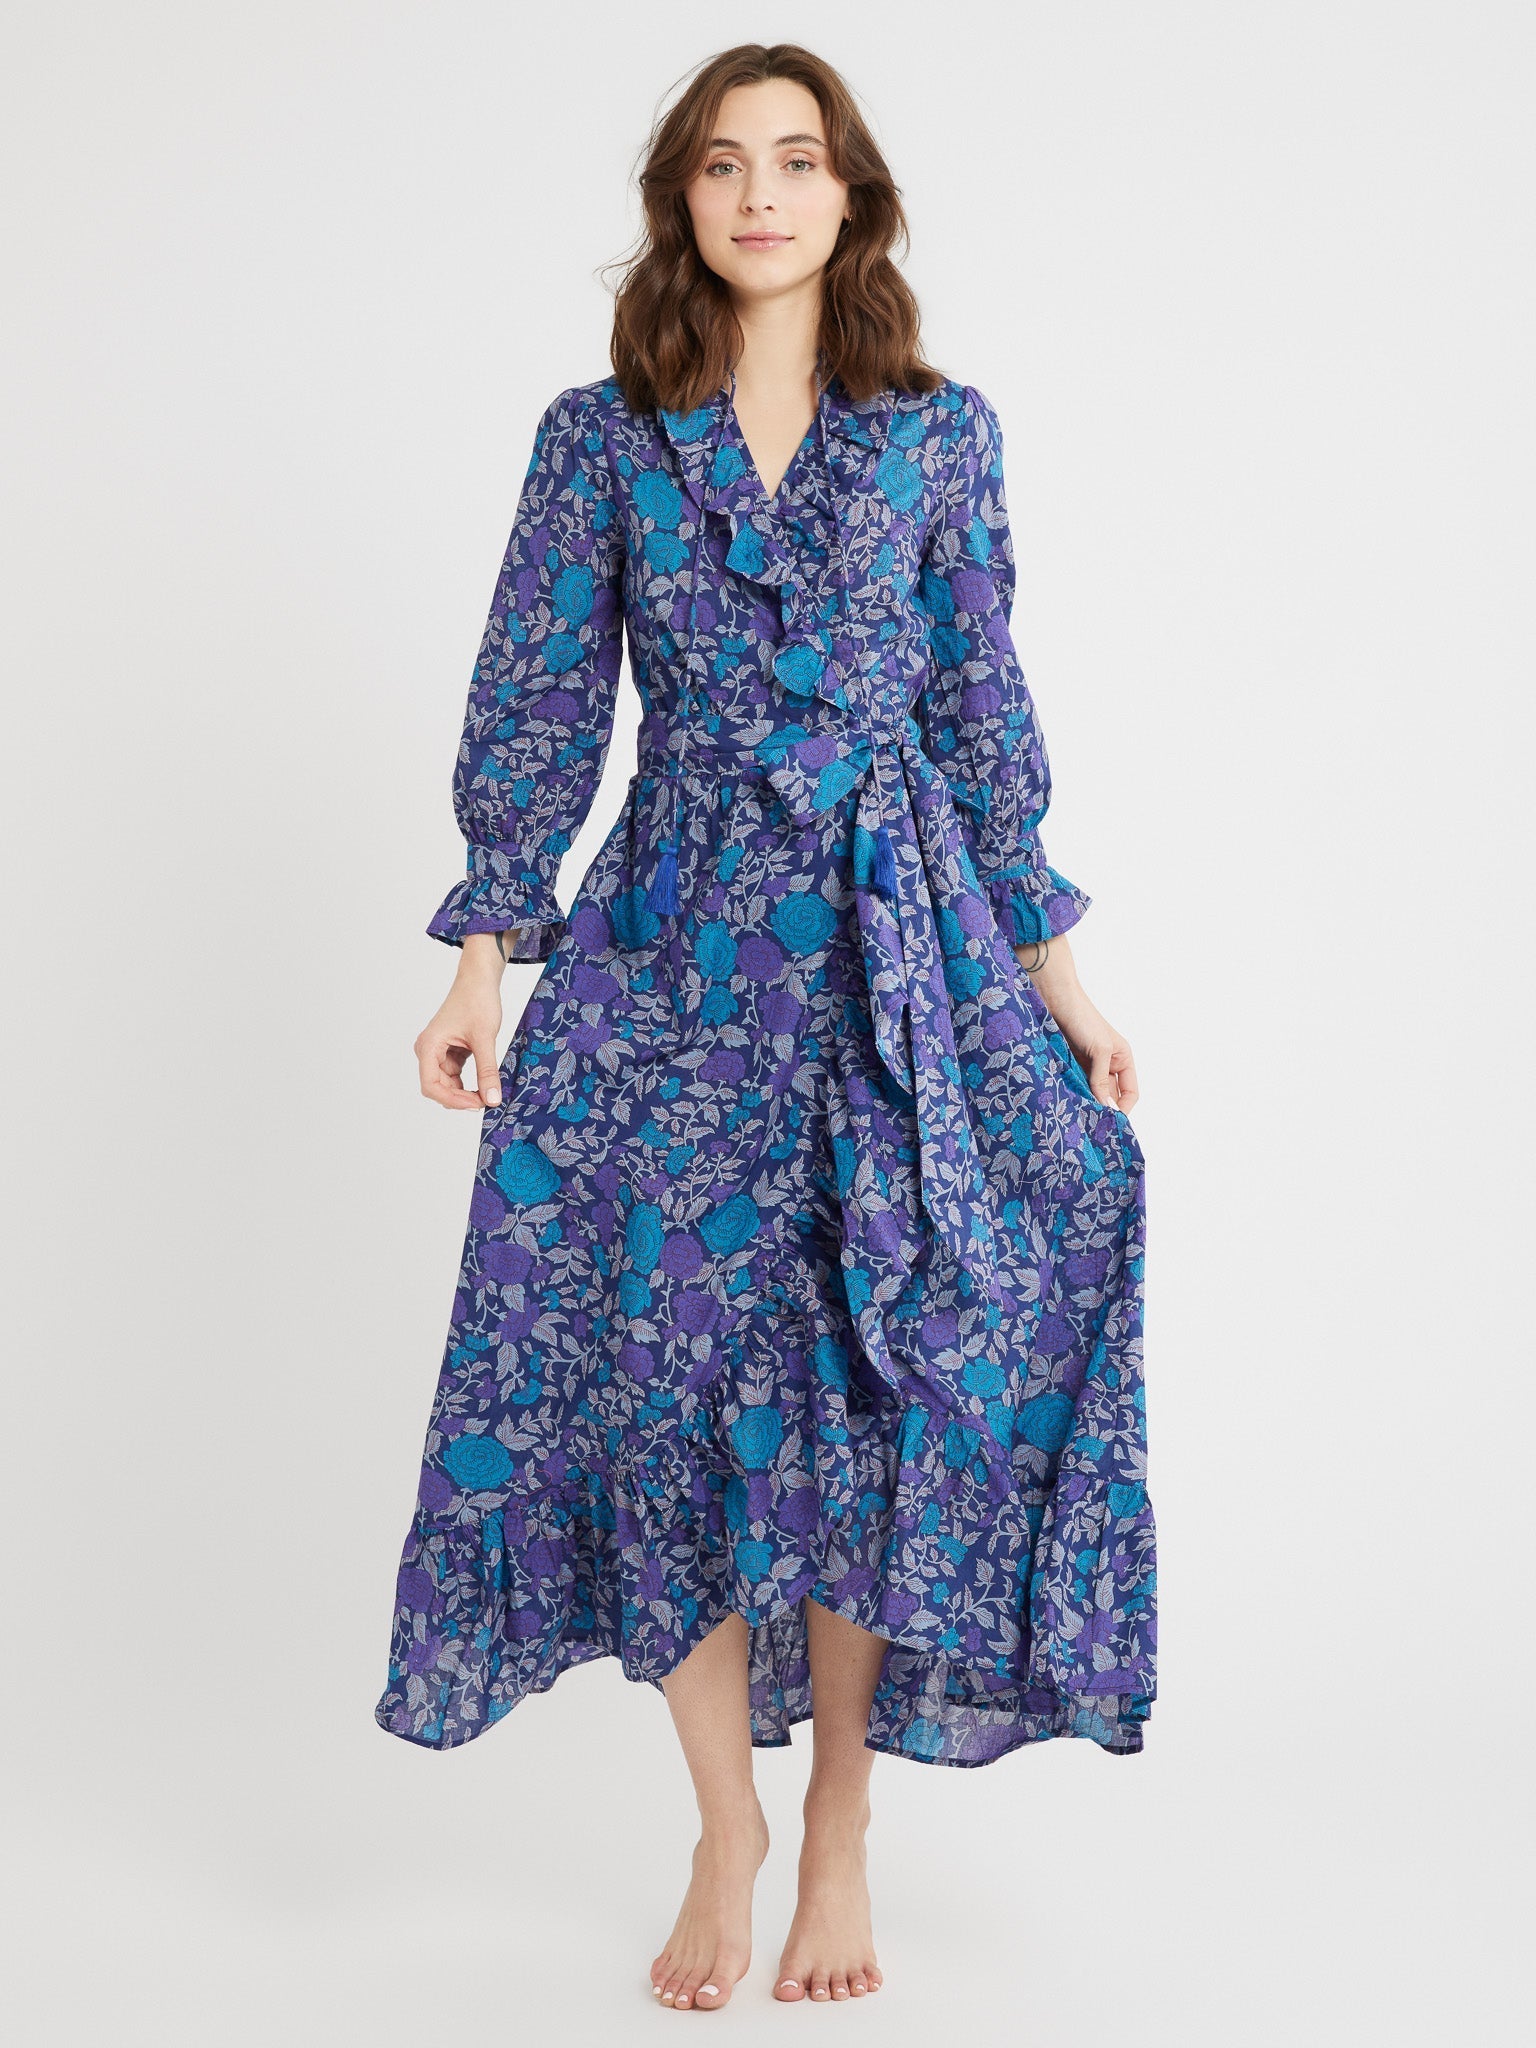 MILLE Clothing Simone Dress in Twilight